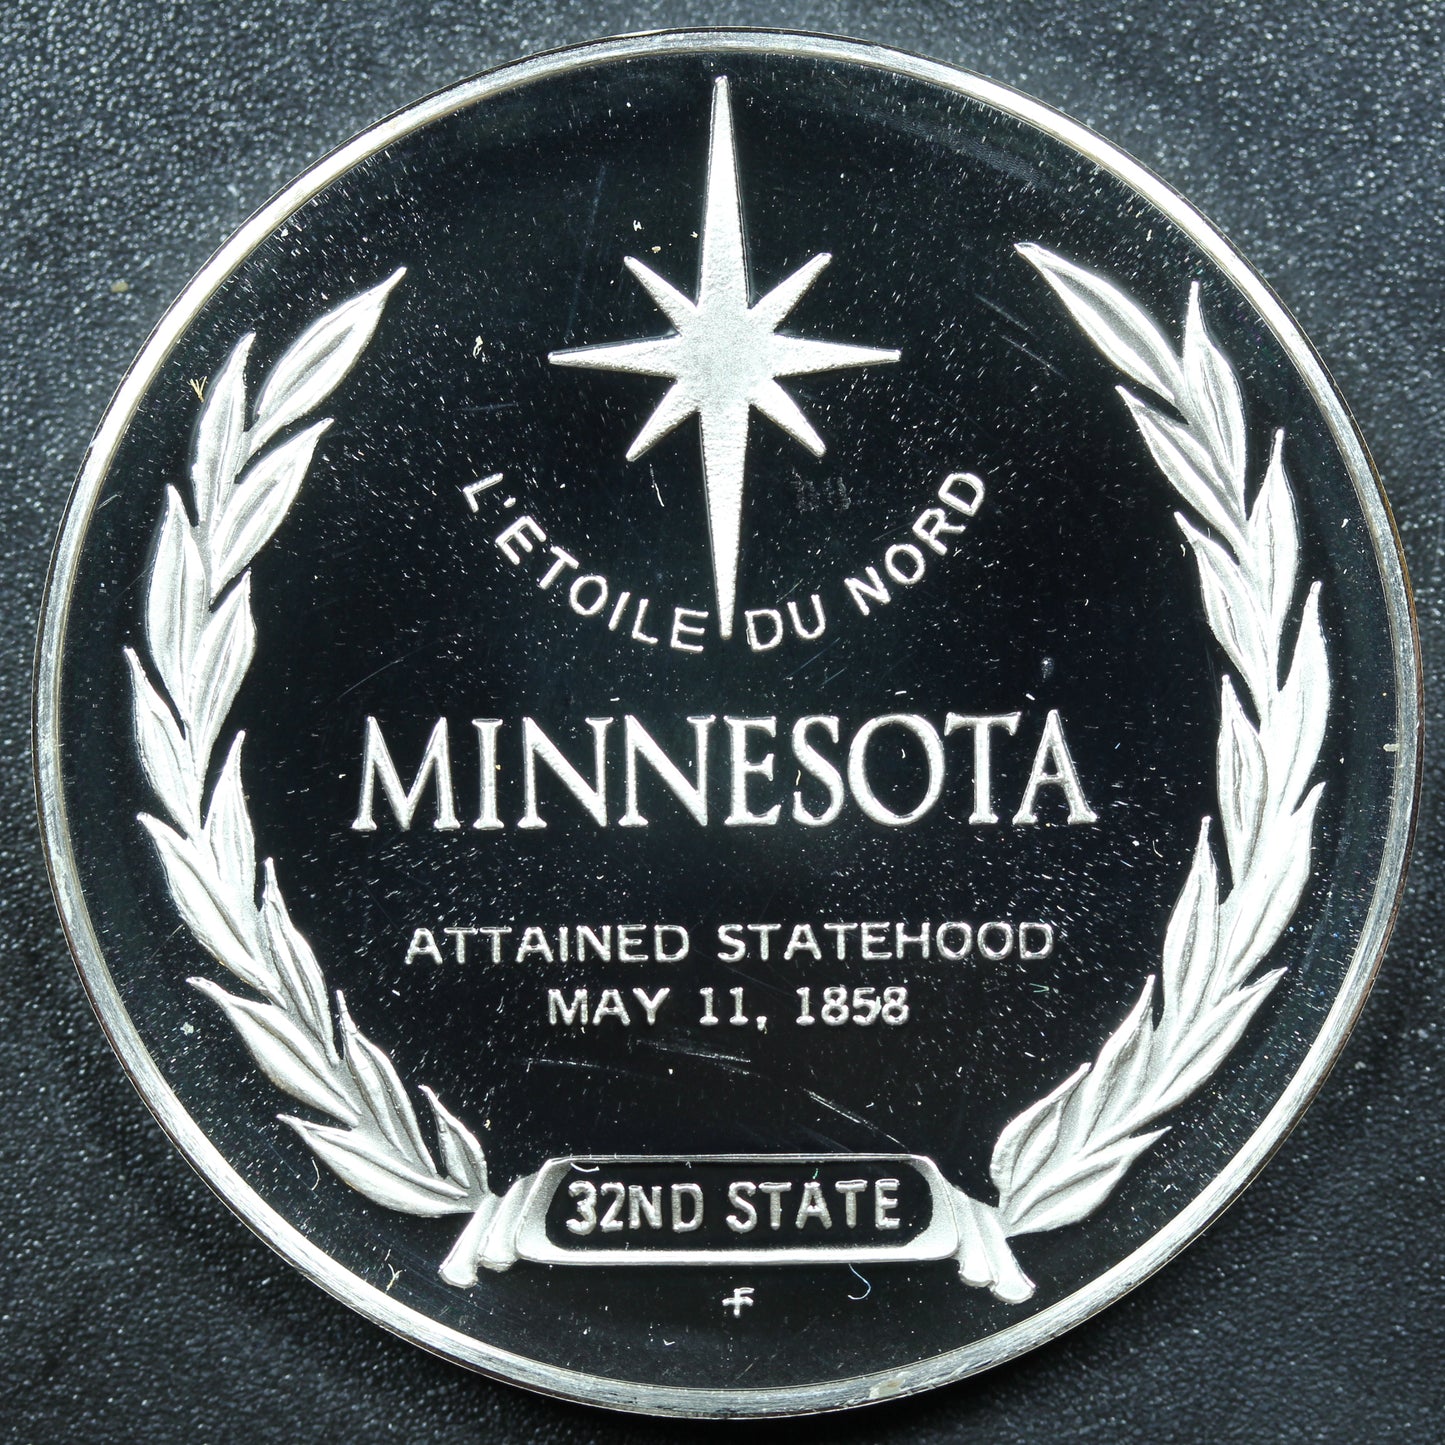 Franklin Mint 50 State Bicentennial Medal - MINNESOTA Sterling Silver Proof w/ Capsule